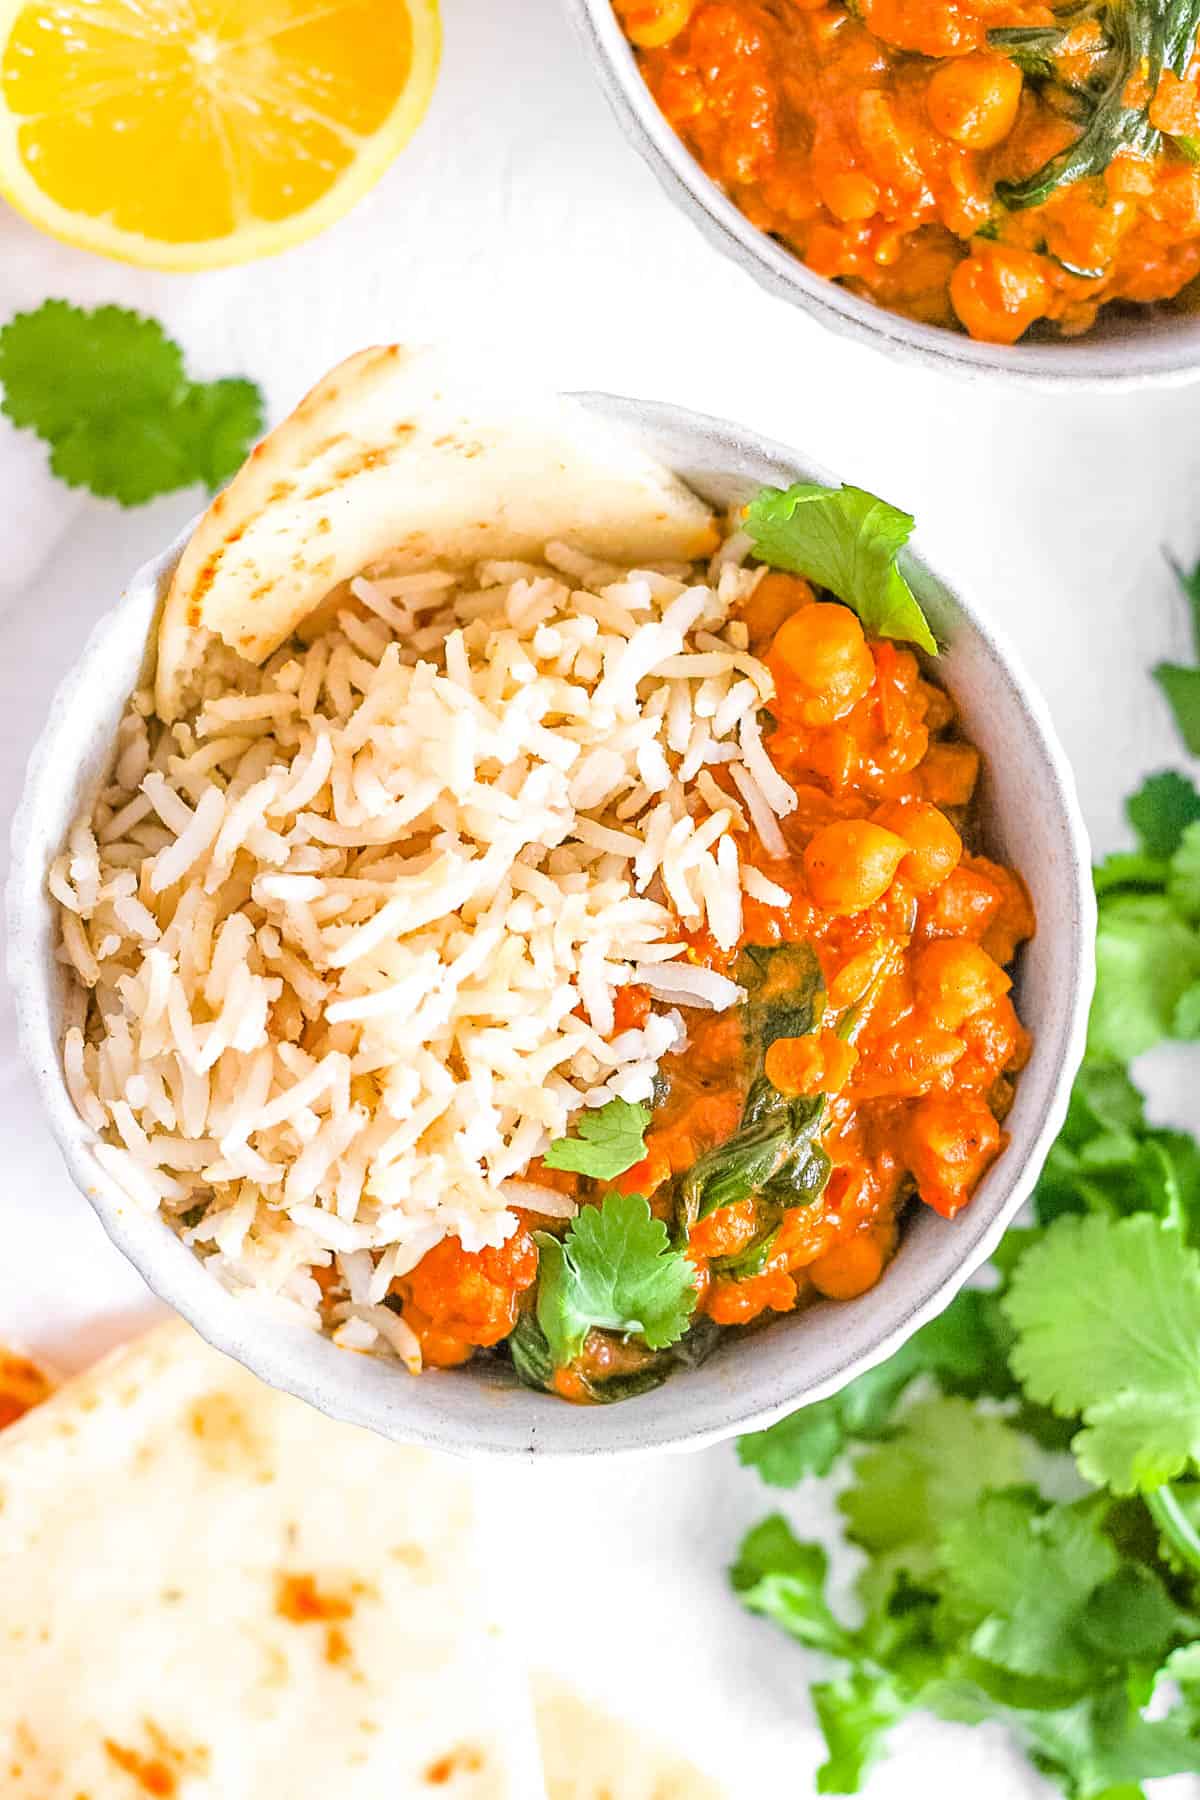 Chickpea and lentil curry served with rice and naan in a white bowl.